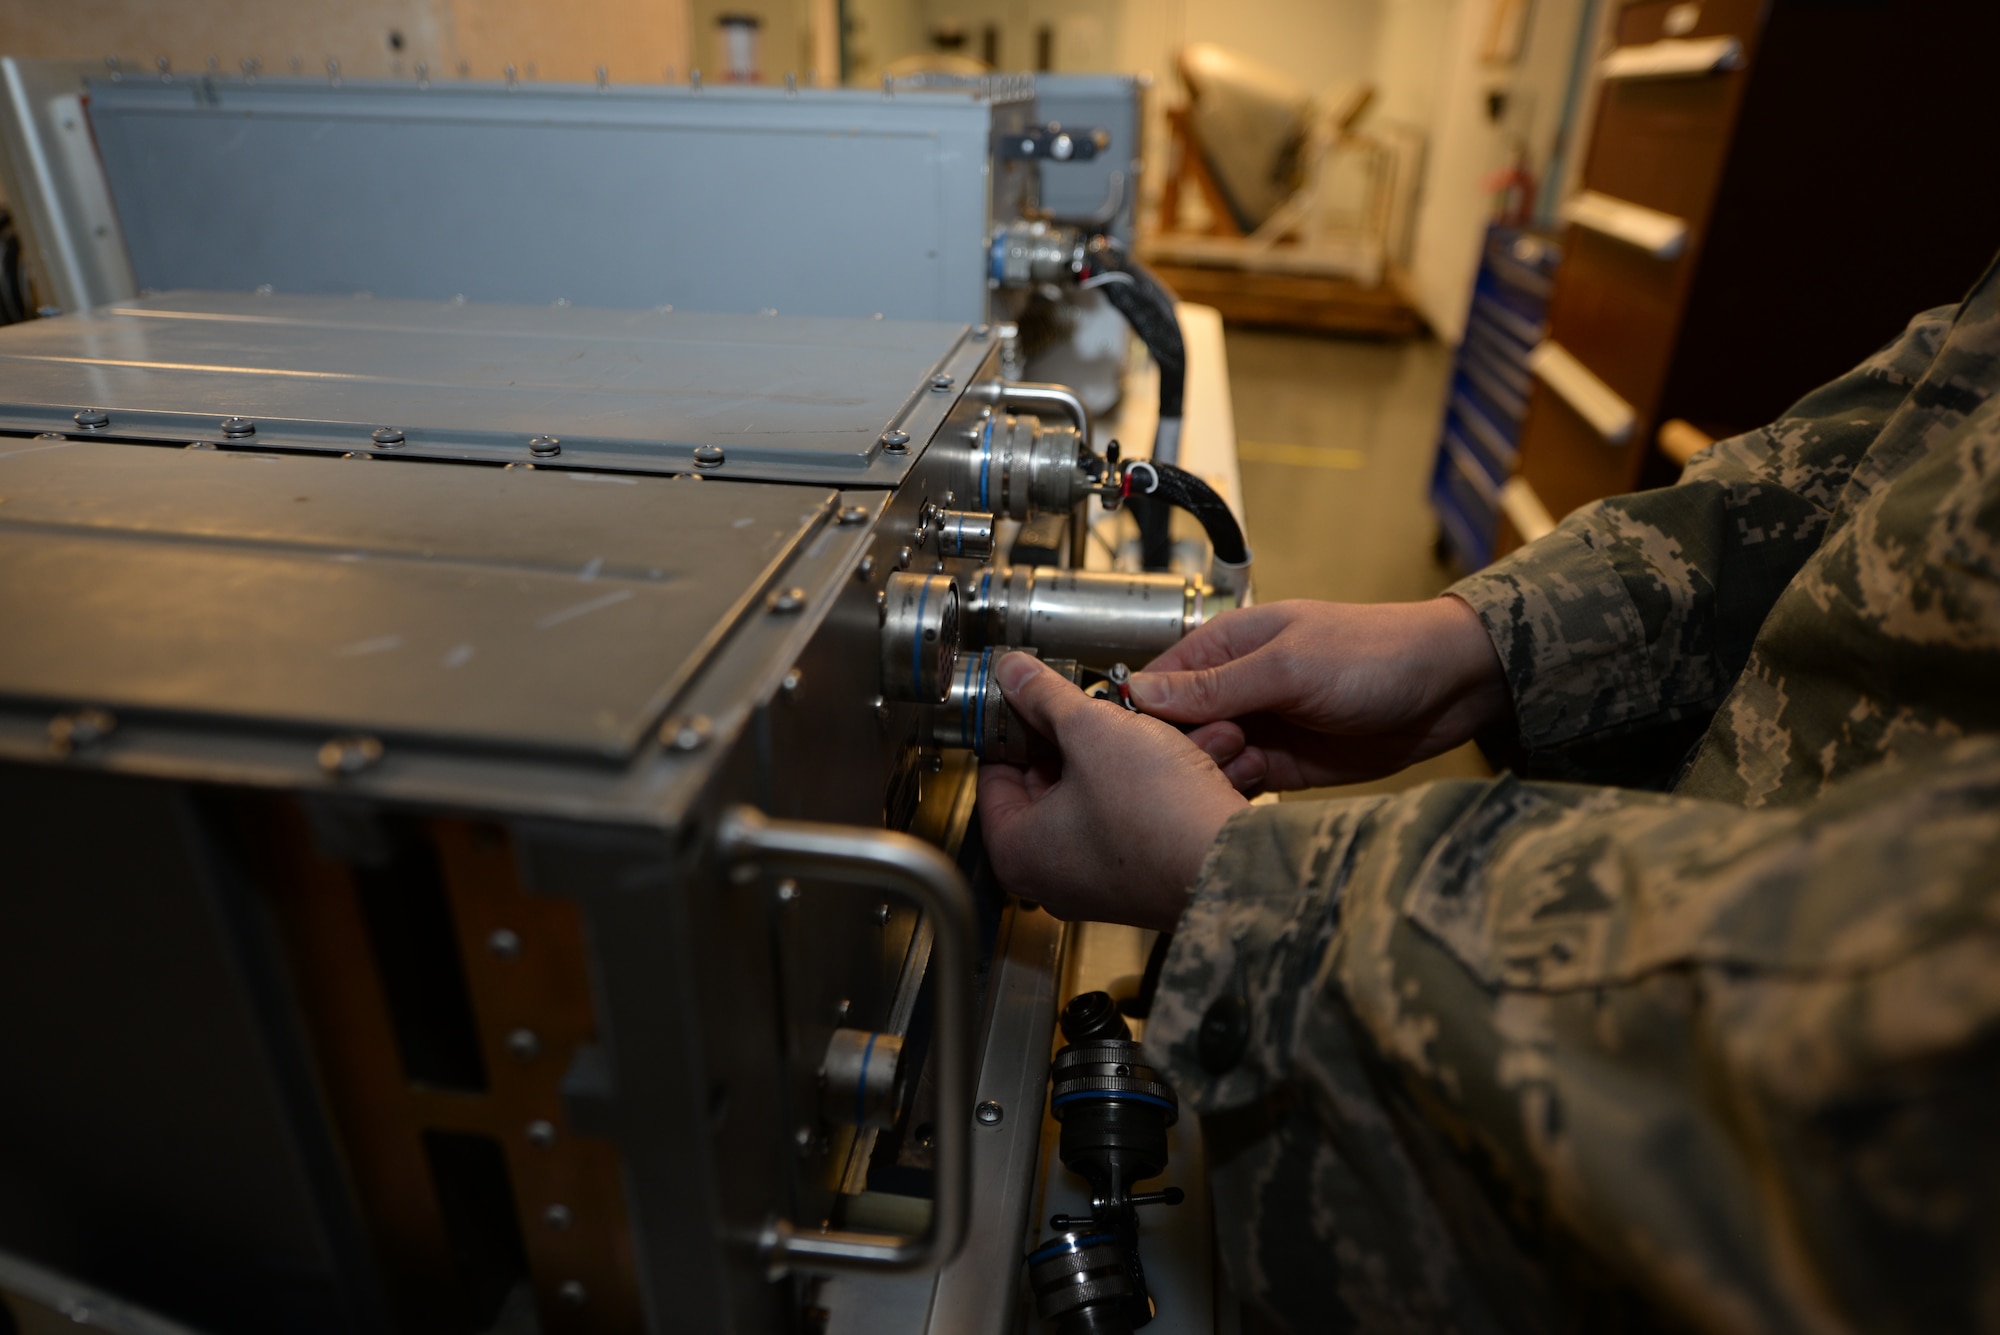 Staff Sgt. Lary Eyre, 28th Maintenance Squadron avionics team leader, connects an electrical plug to a radar video signal processor unit at Ellsworth Air Force Base, S.D., Jan. 6, 2016. The RSVP generates signals that transmit to a radar target indicator, which displays what the aircraft can sense on the ground onto a screen. (U.S. Air Force photo by Airman Sadie Colbert/Released)